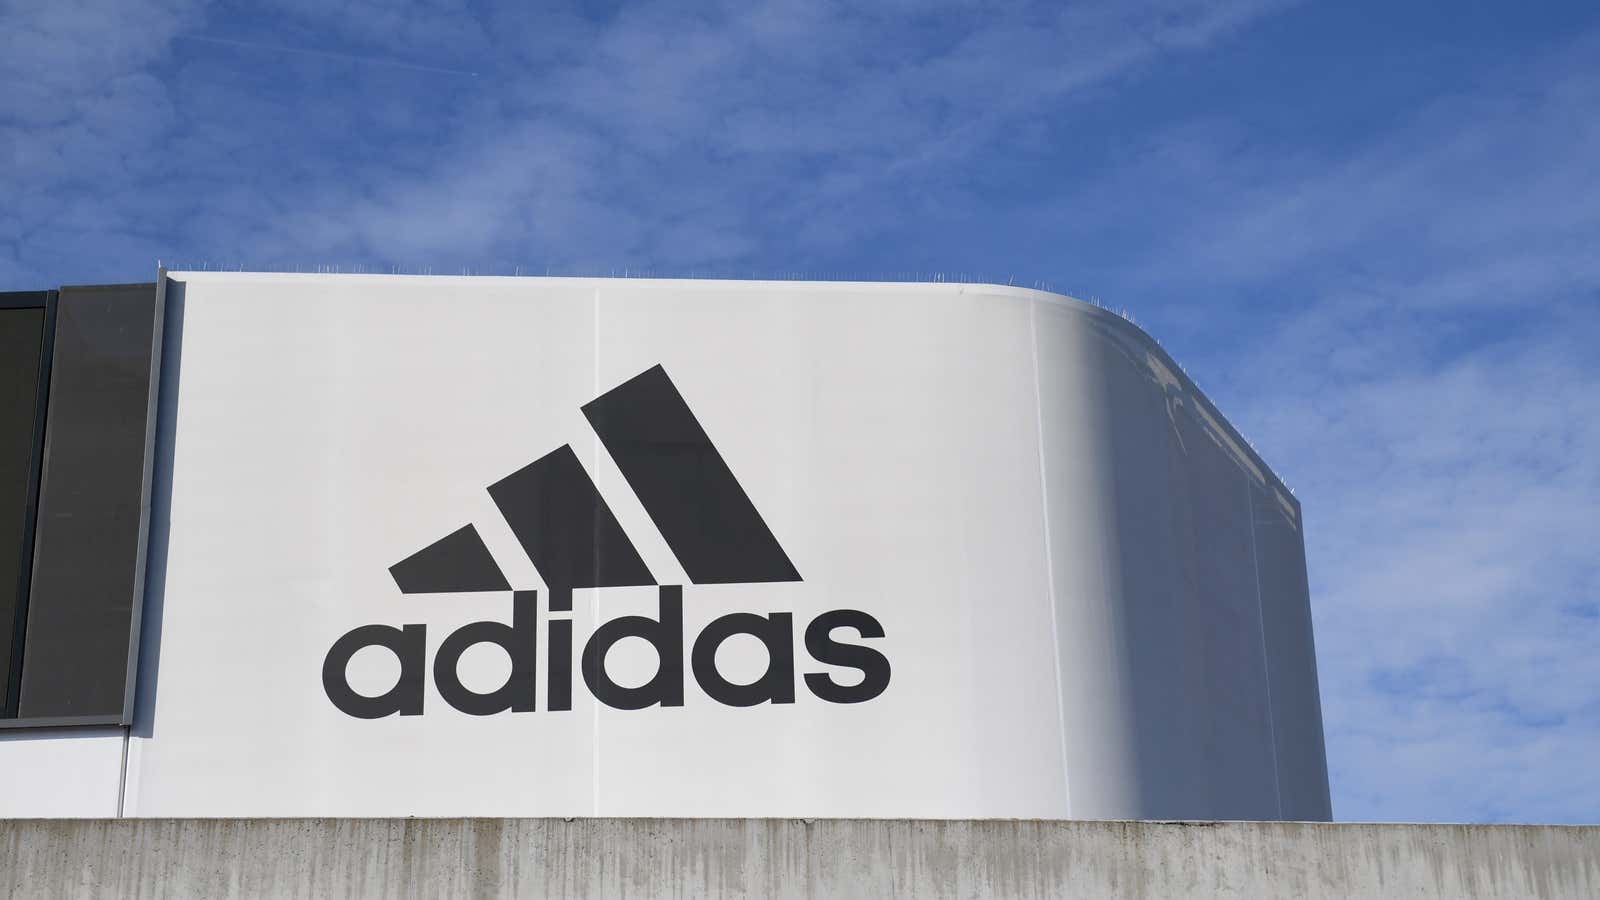 Adidas has hired a new HR chief, after the last one stepped down amid allegations of racism at the company.